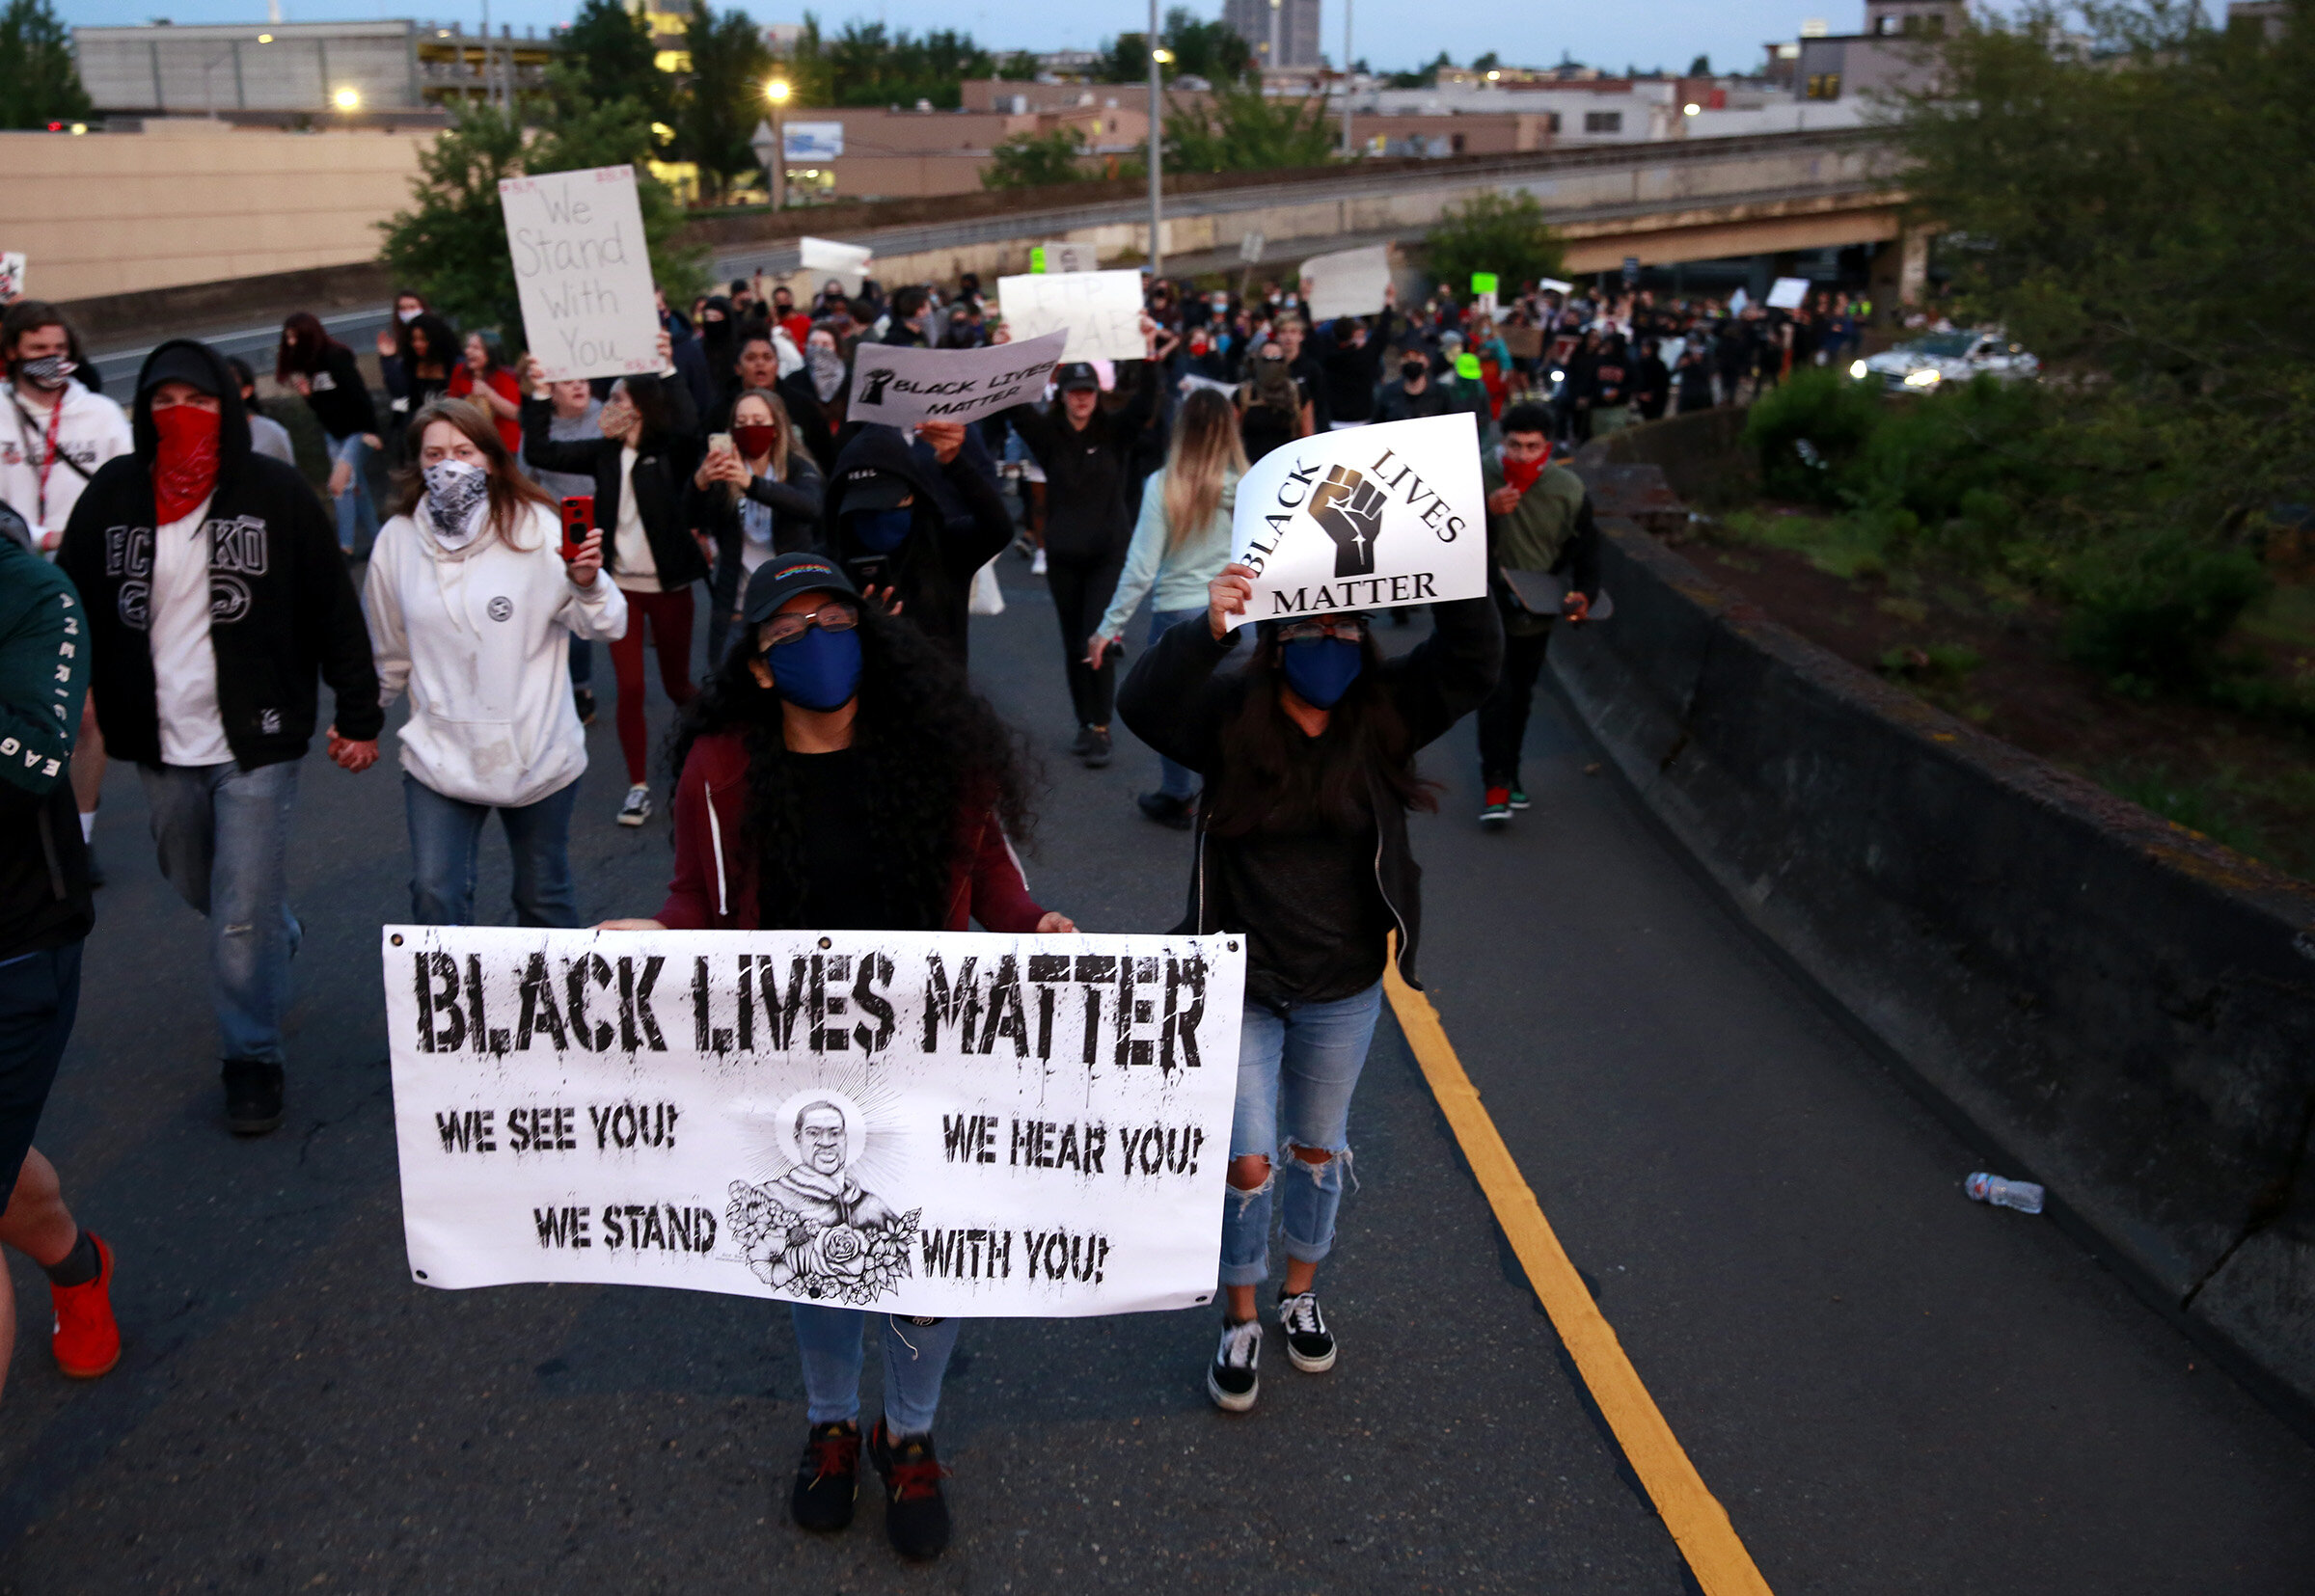  Protesters march up a ramp onto the Marion Street Bridge in Salem, Oregon, on Sunday, May 31, 2020. 